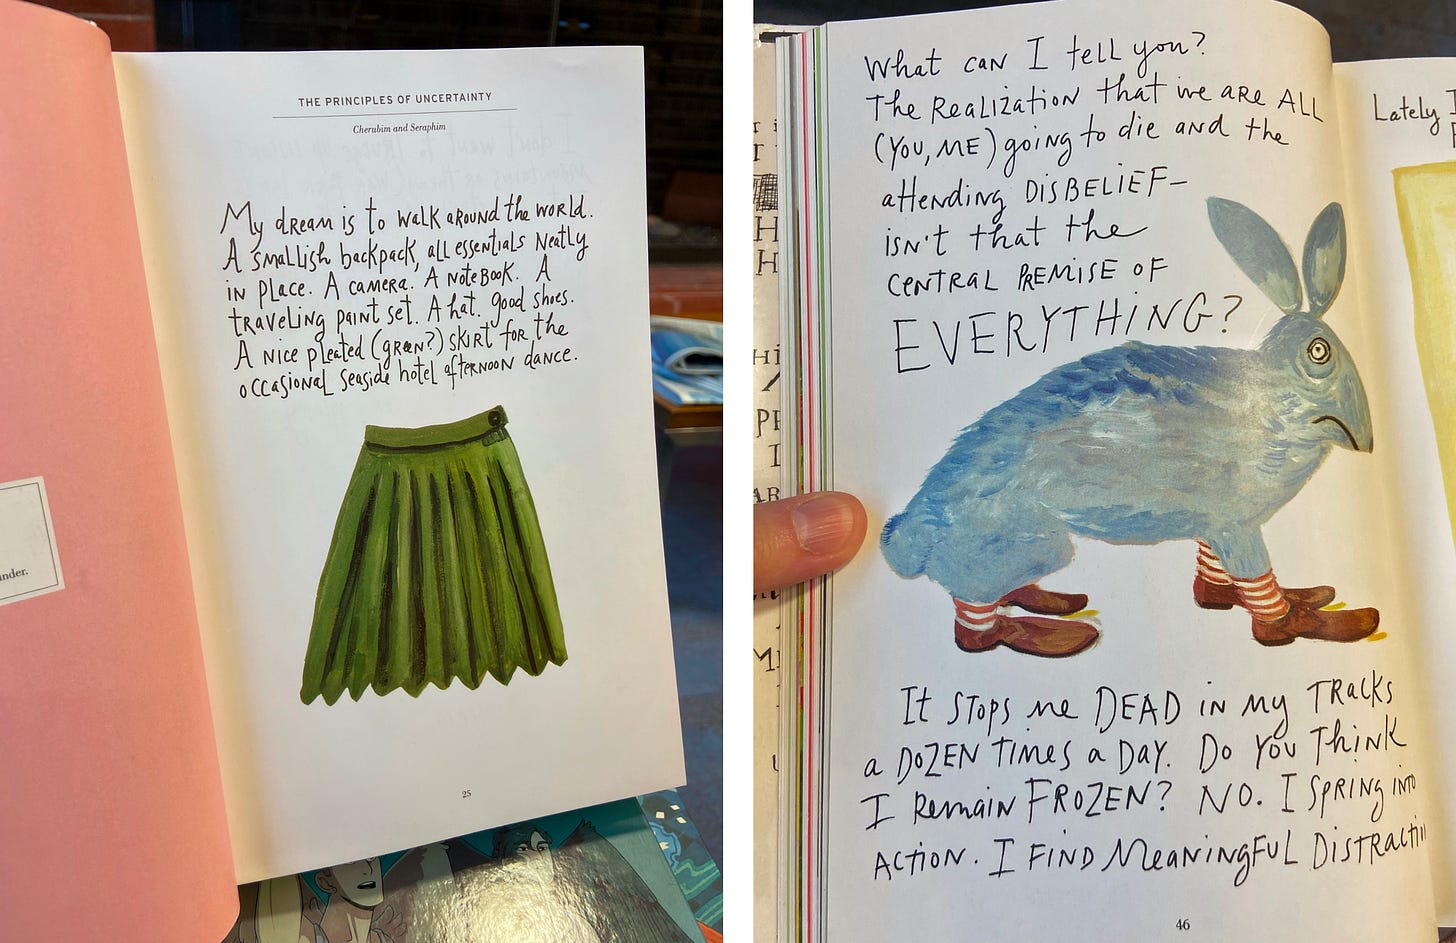 Reading Maira Kalman’s Principles of Uncertainty at the library.